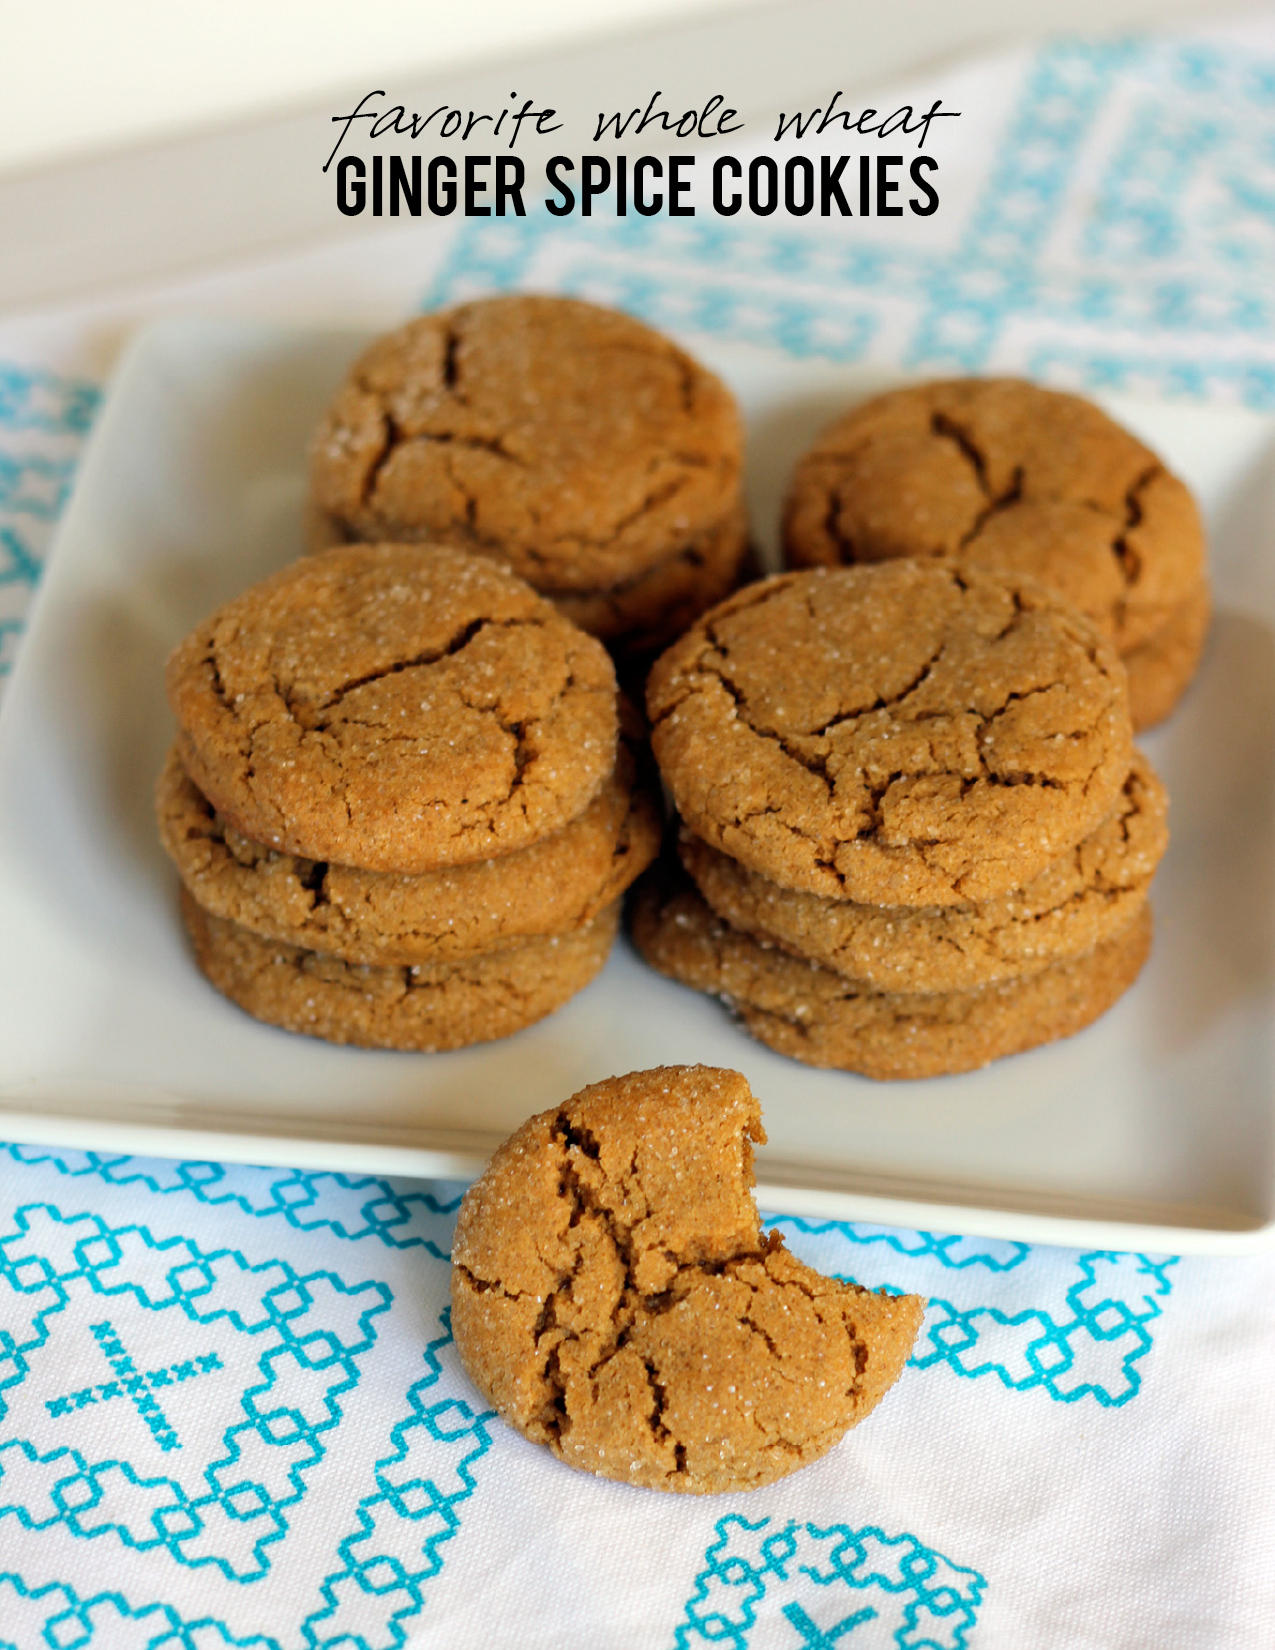 Soft whole wheat ginger spice cookies